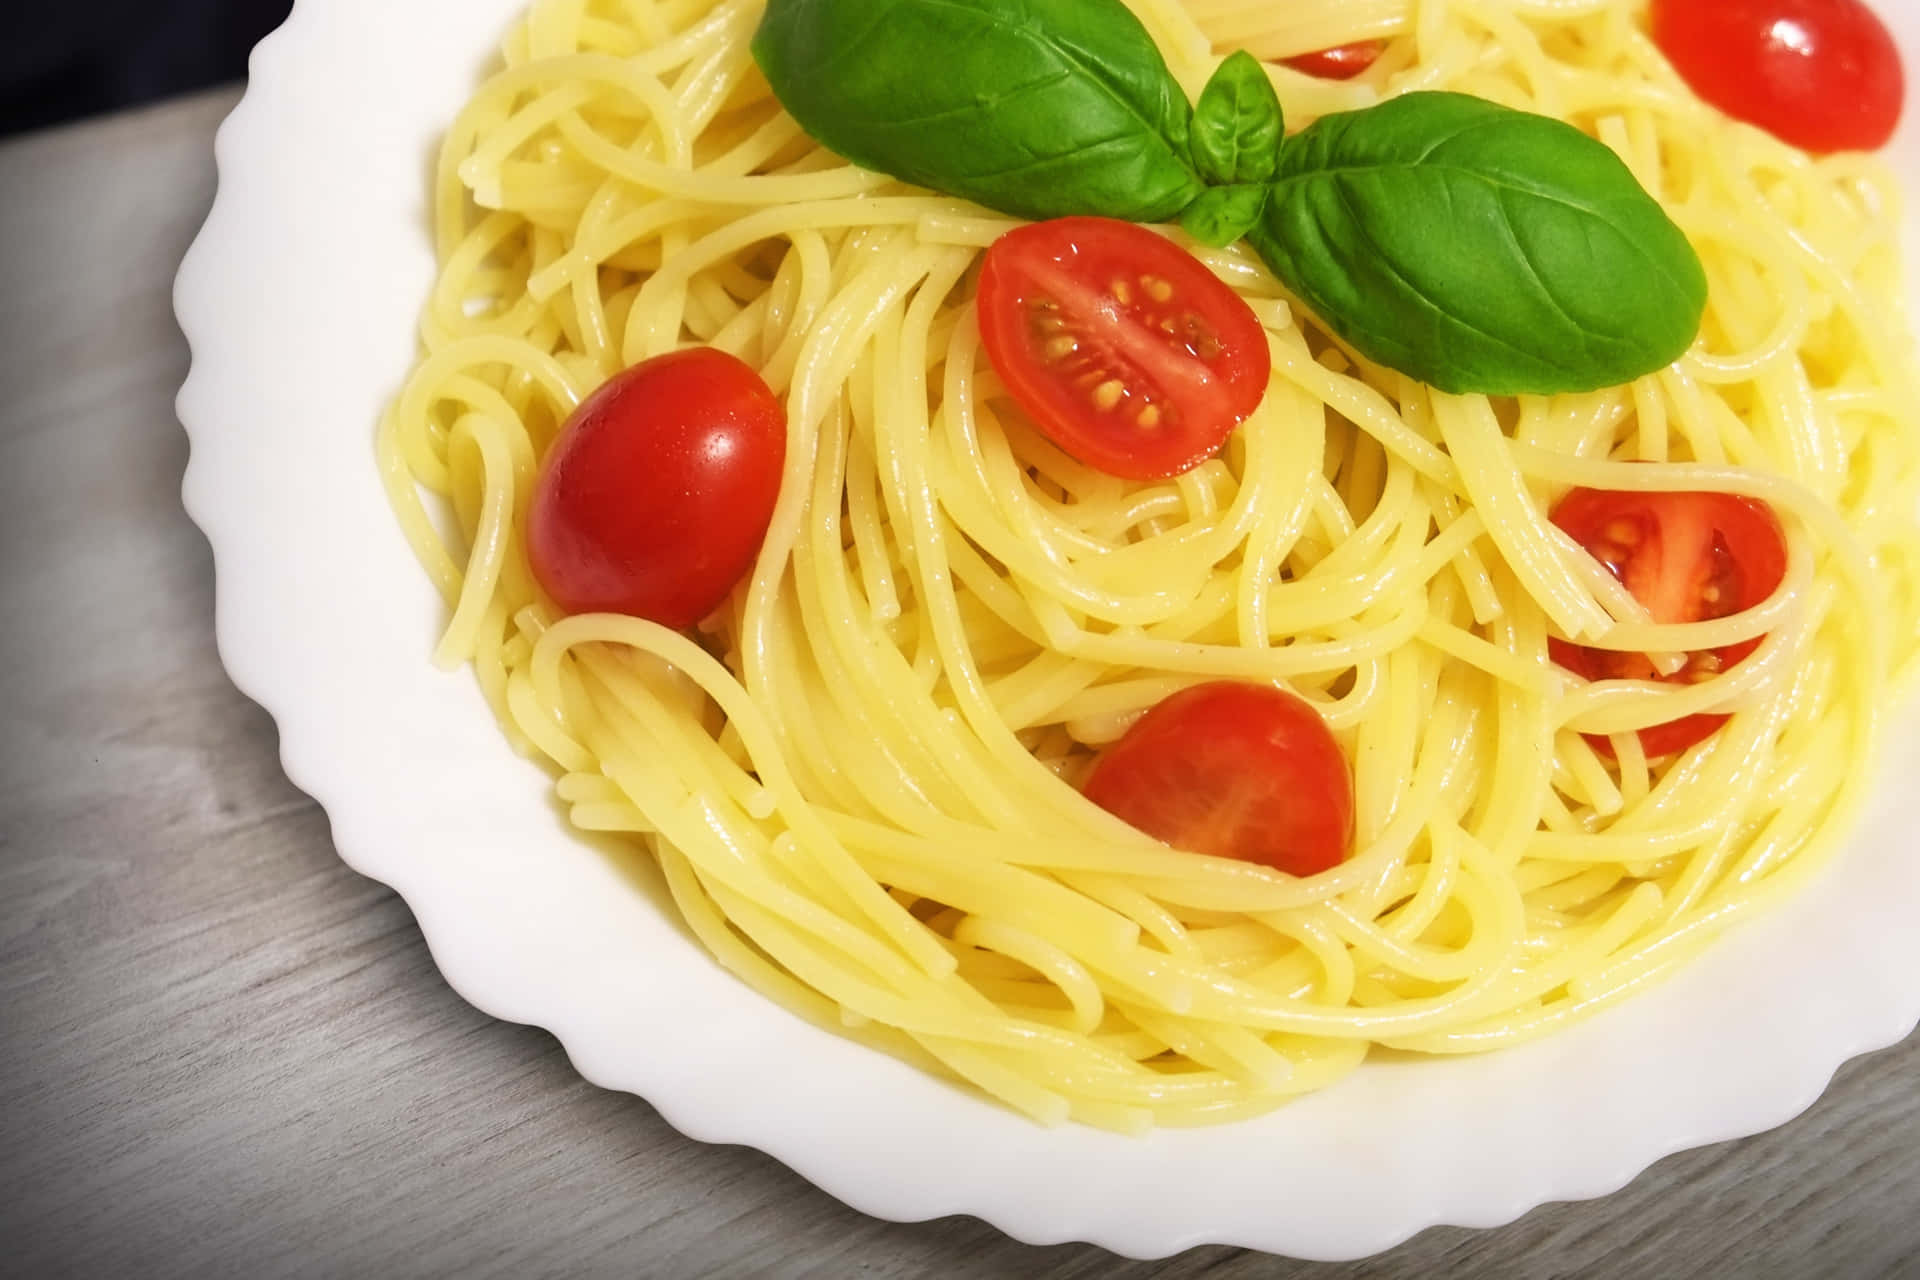 Download A Plate Of Spaghetti With Tomatoes And Basil | Wallpapers.com